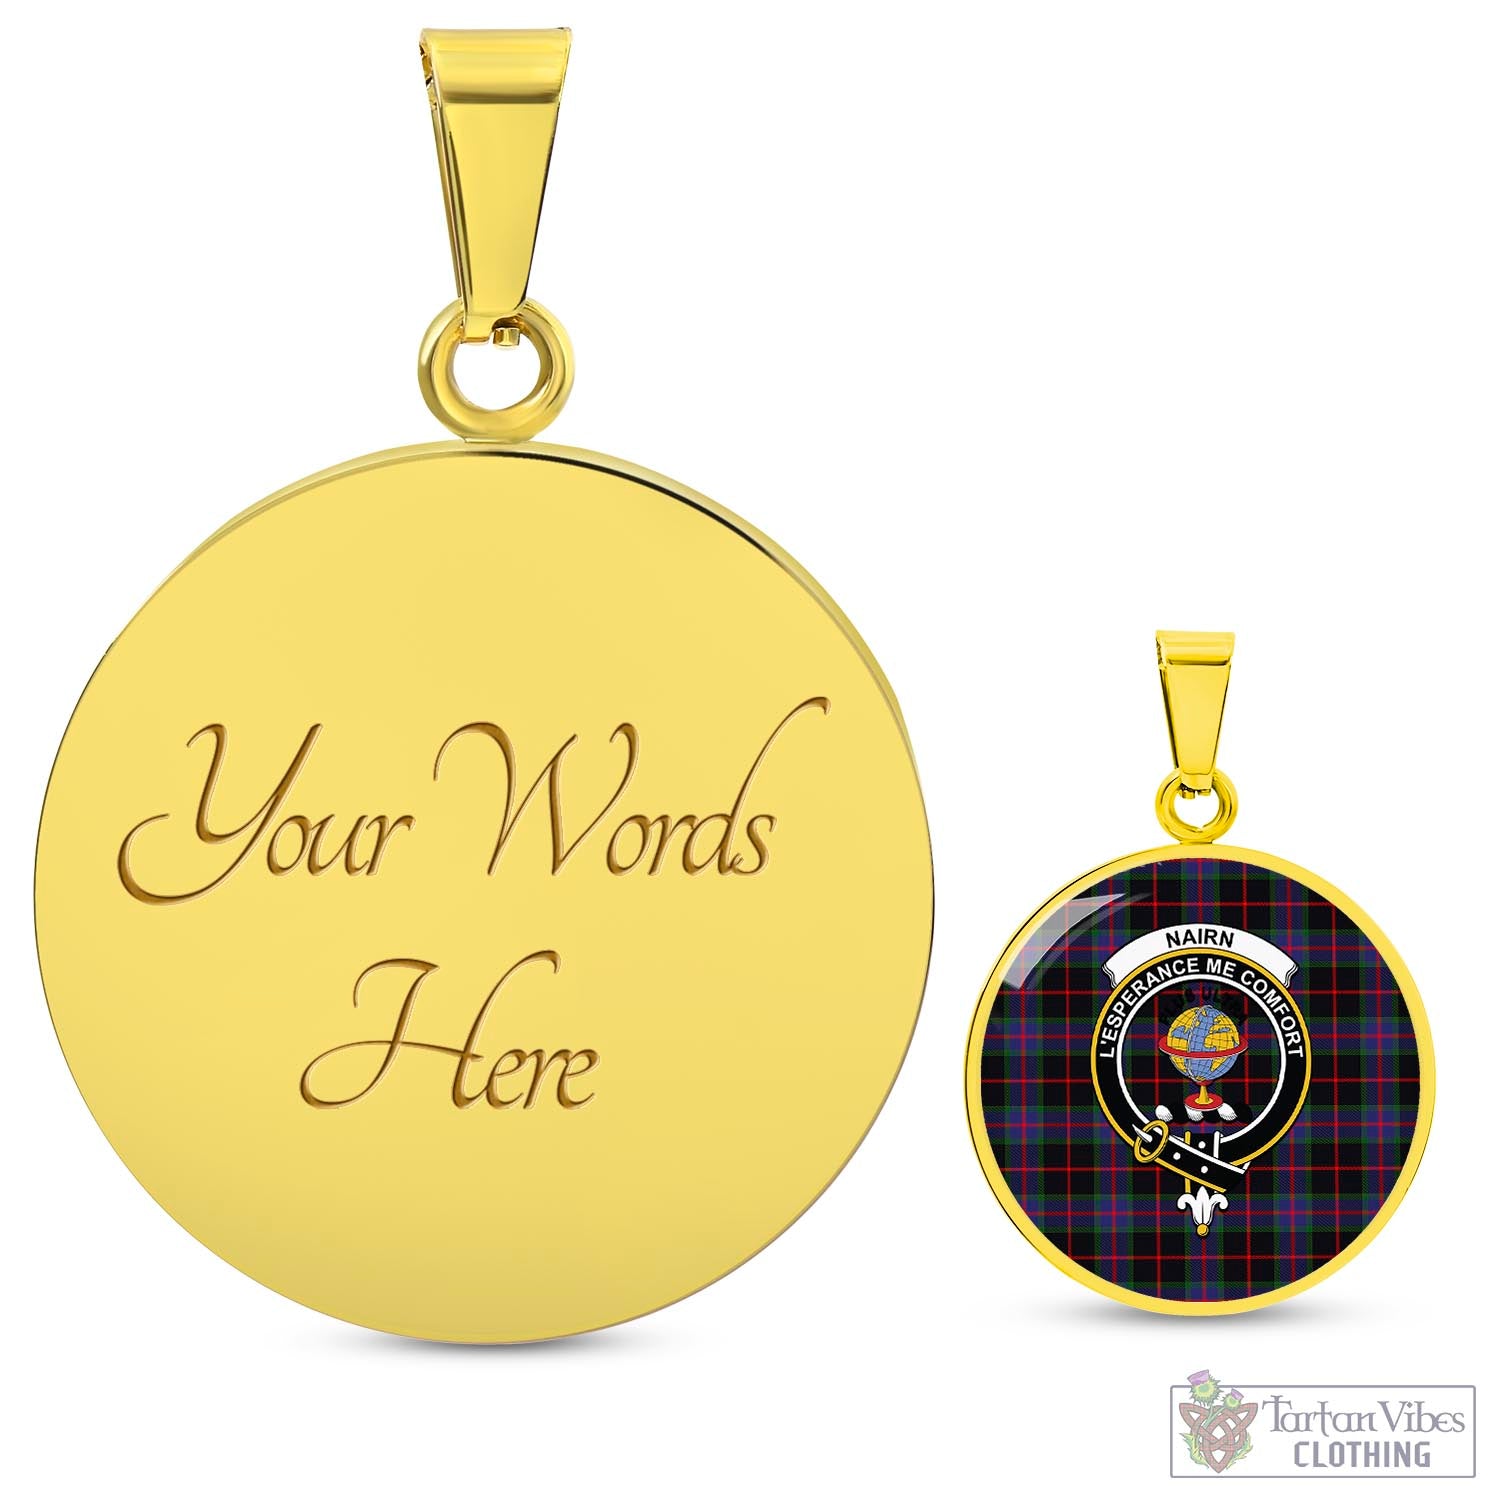 Tartan Vibes Clothing Nairn Tartan Circle Necklace with Family Crest